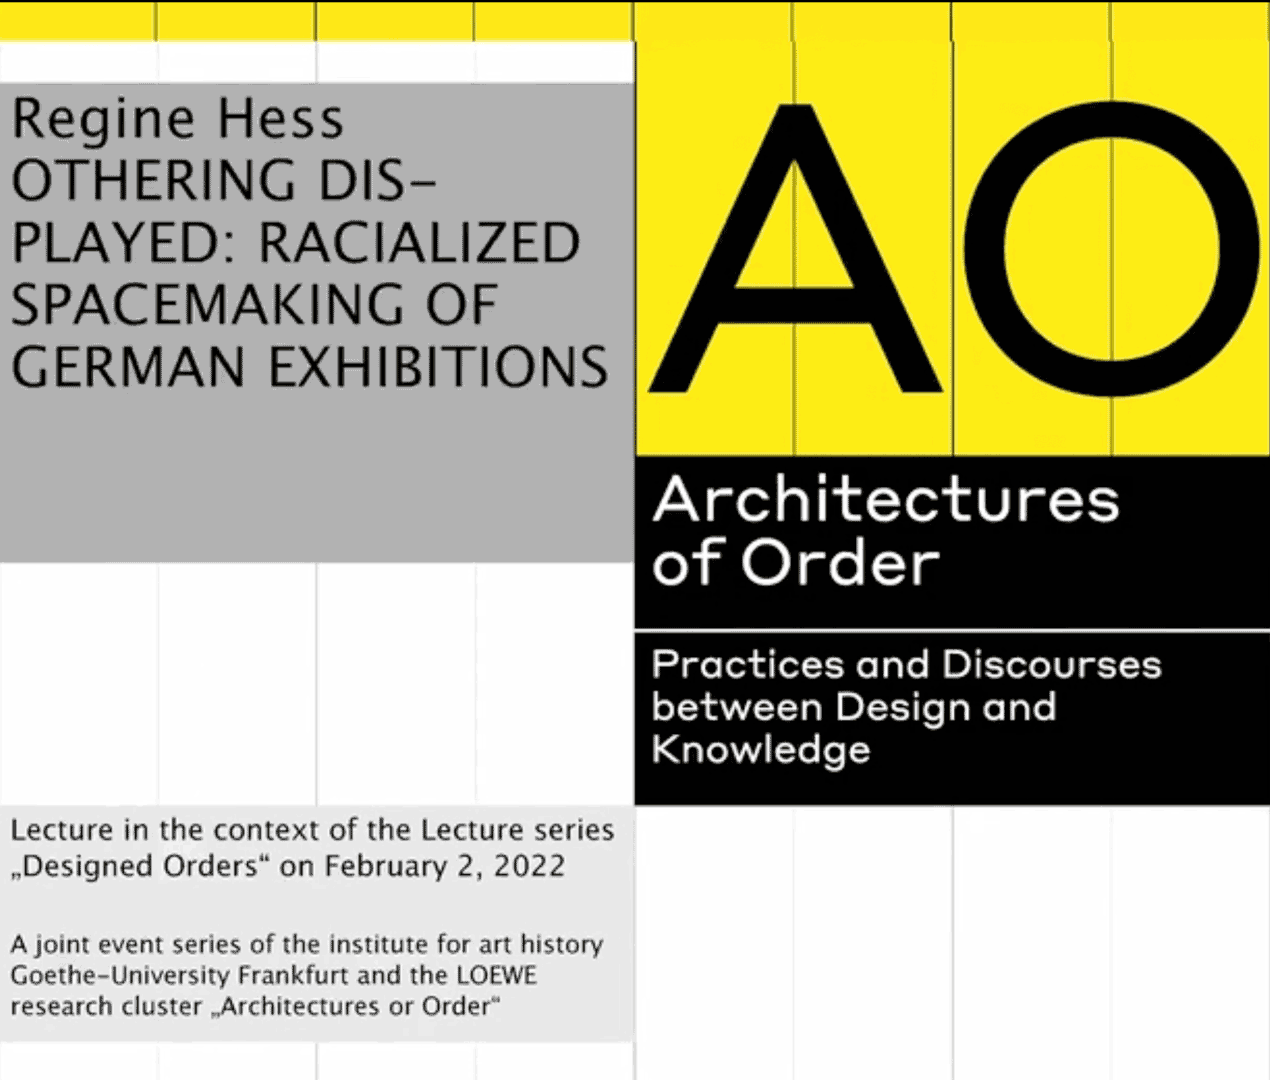 Designed Orders Lecture Series. Architectures of Order. Regine Hess (ETH ZUrich) – Othering Displayed: Racialized Spacemaking of German Exhibitions